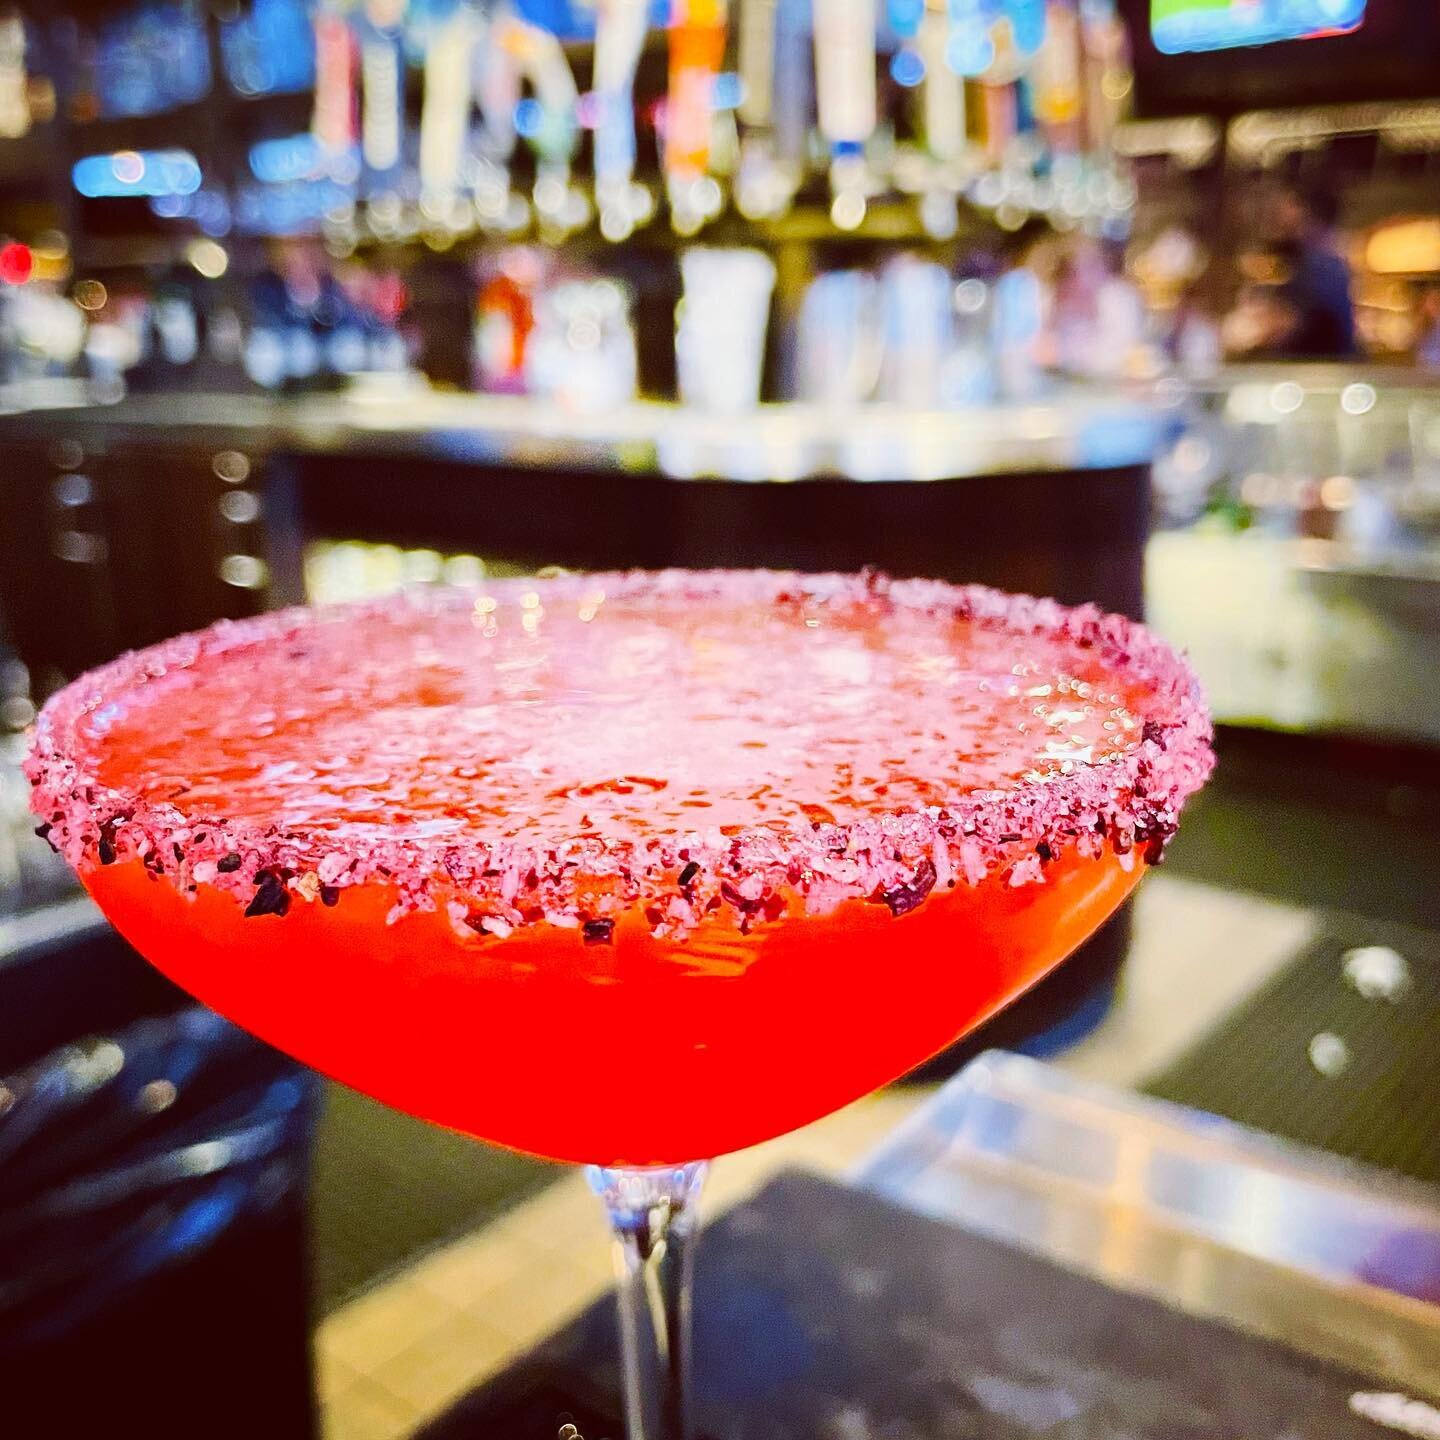 📣The Cheerleader 📣 Everyone favorite part of the game! This is the &ldquo;adult&rdquo; fruit punch you never knew you needed! Garnished with a Hibiscus sugar rim from our friends @cindymdtd @matthew.mcclure.315 @dressthedrink 👏🏻👏🏻

📣Available 